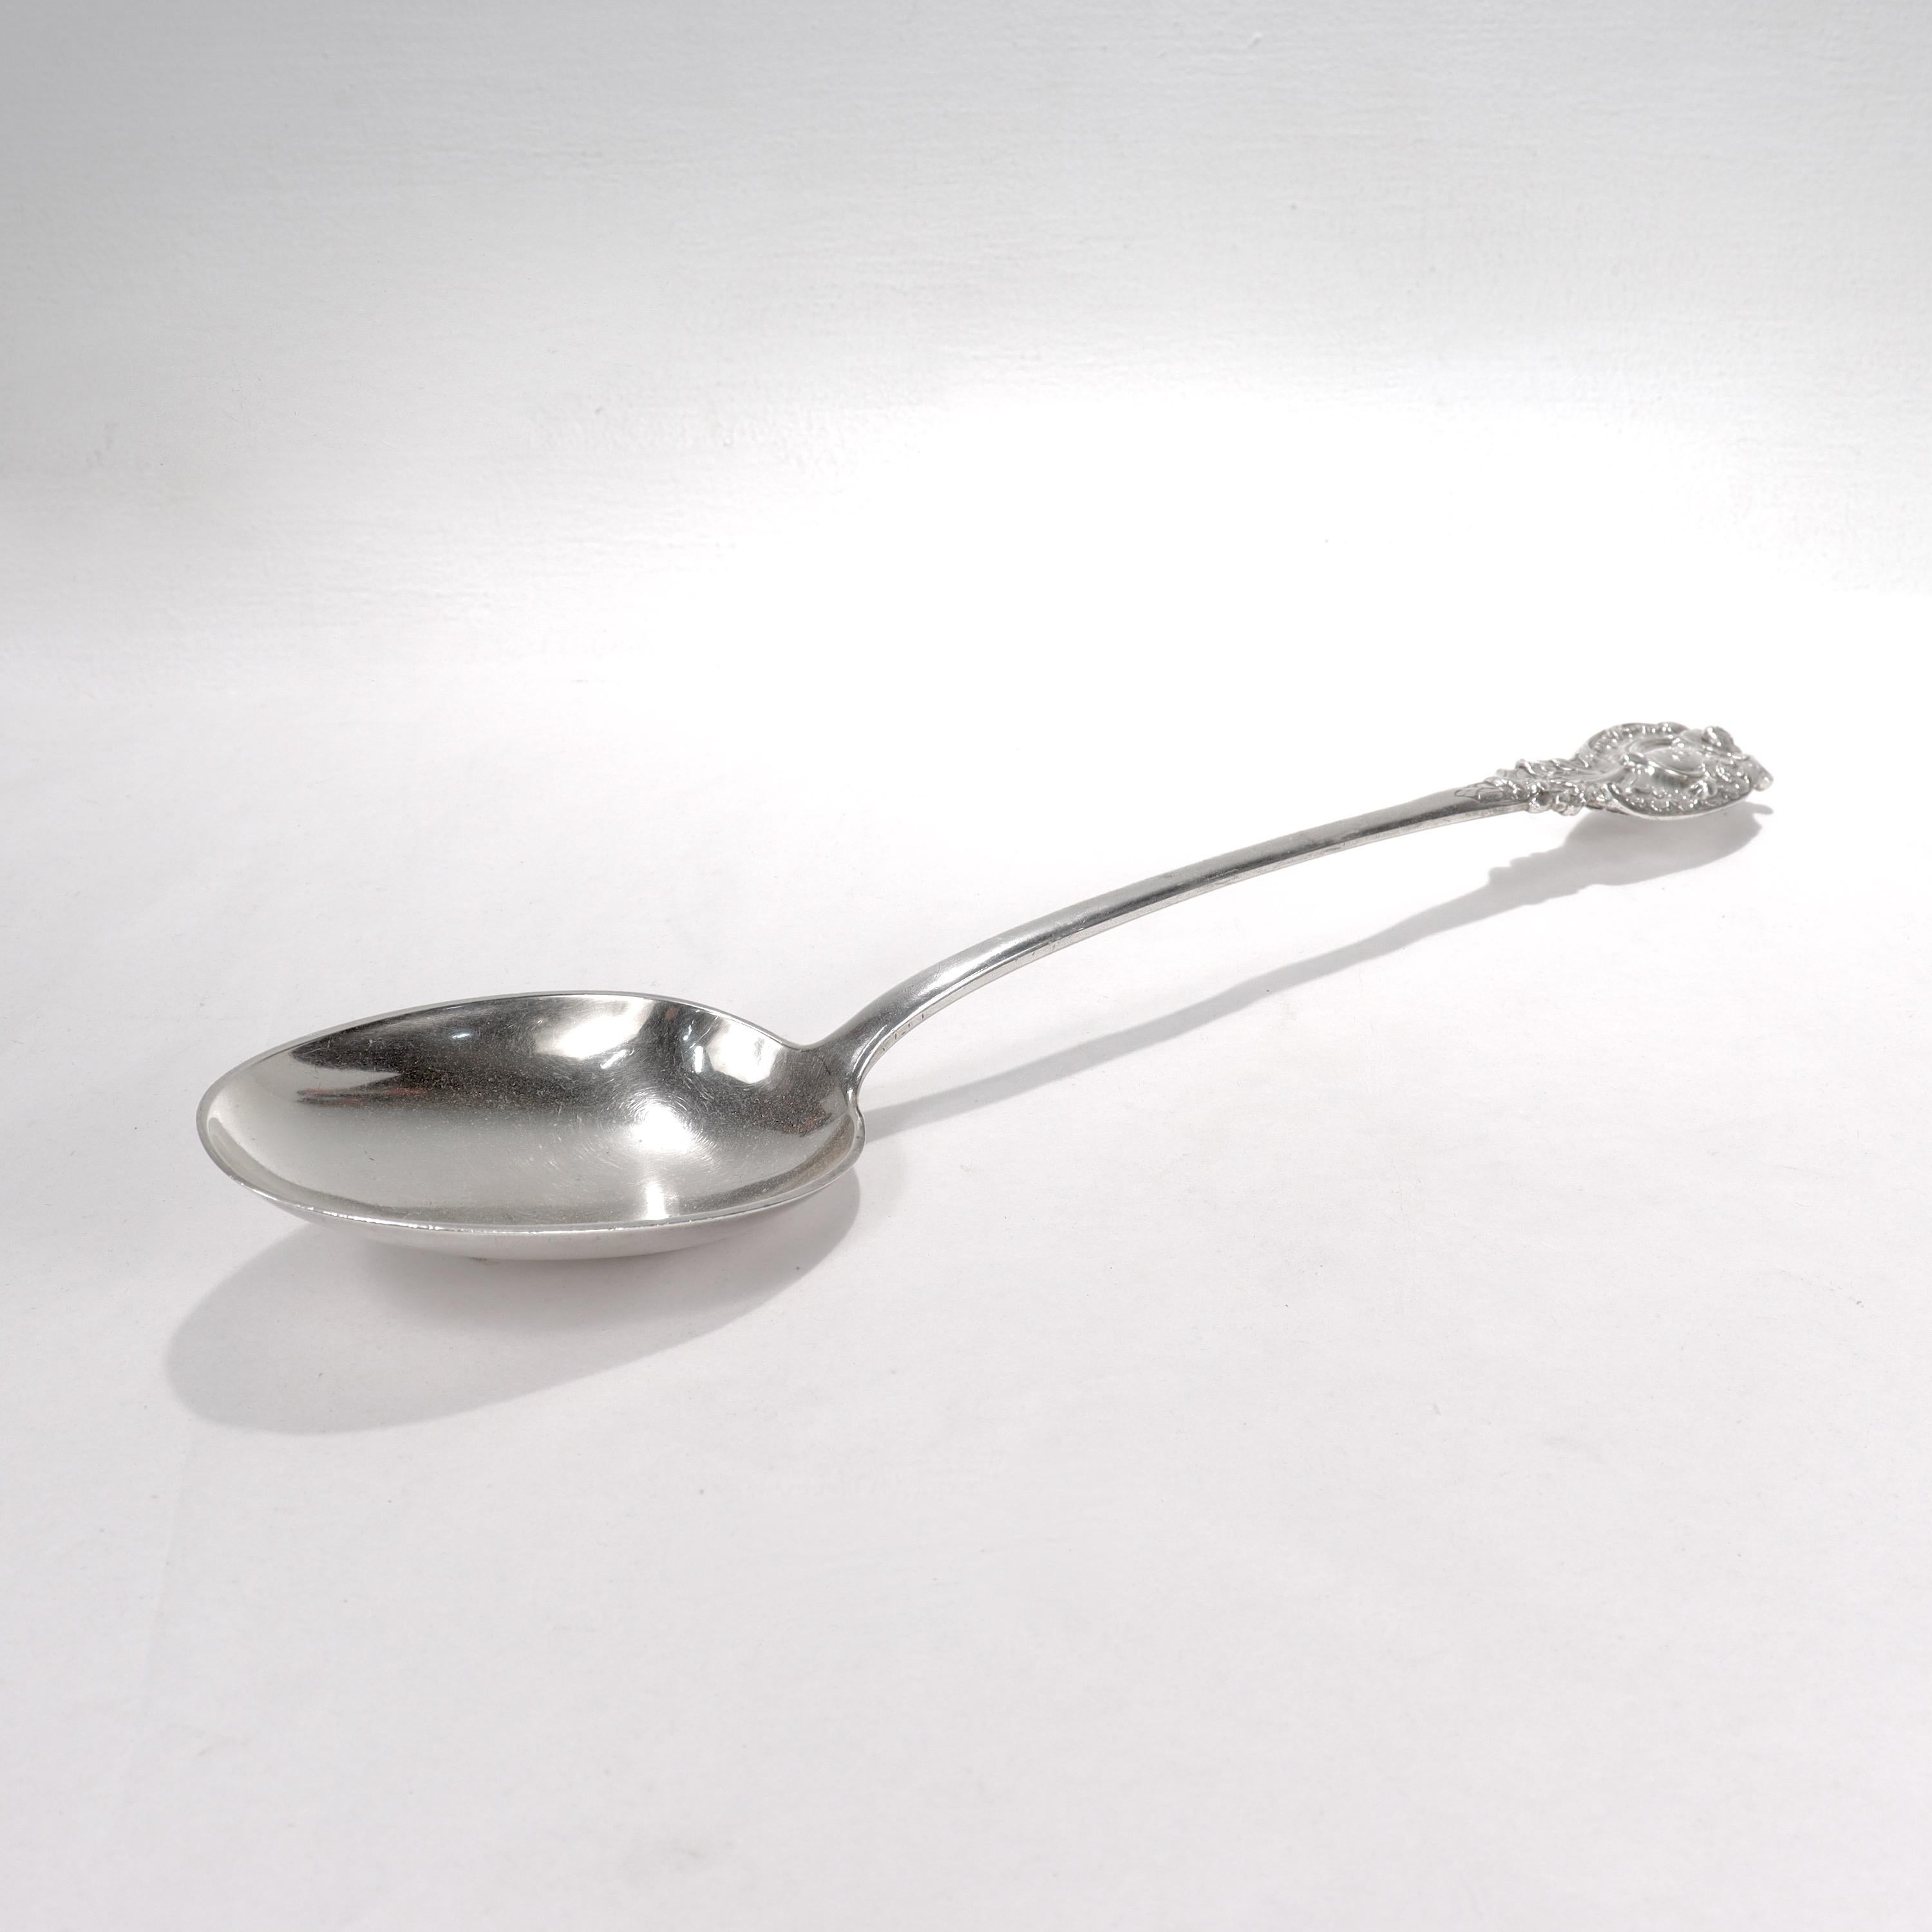 comically large spoon for sale